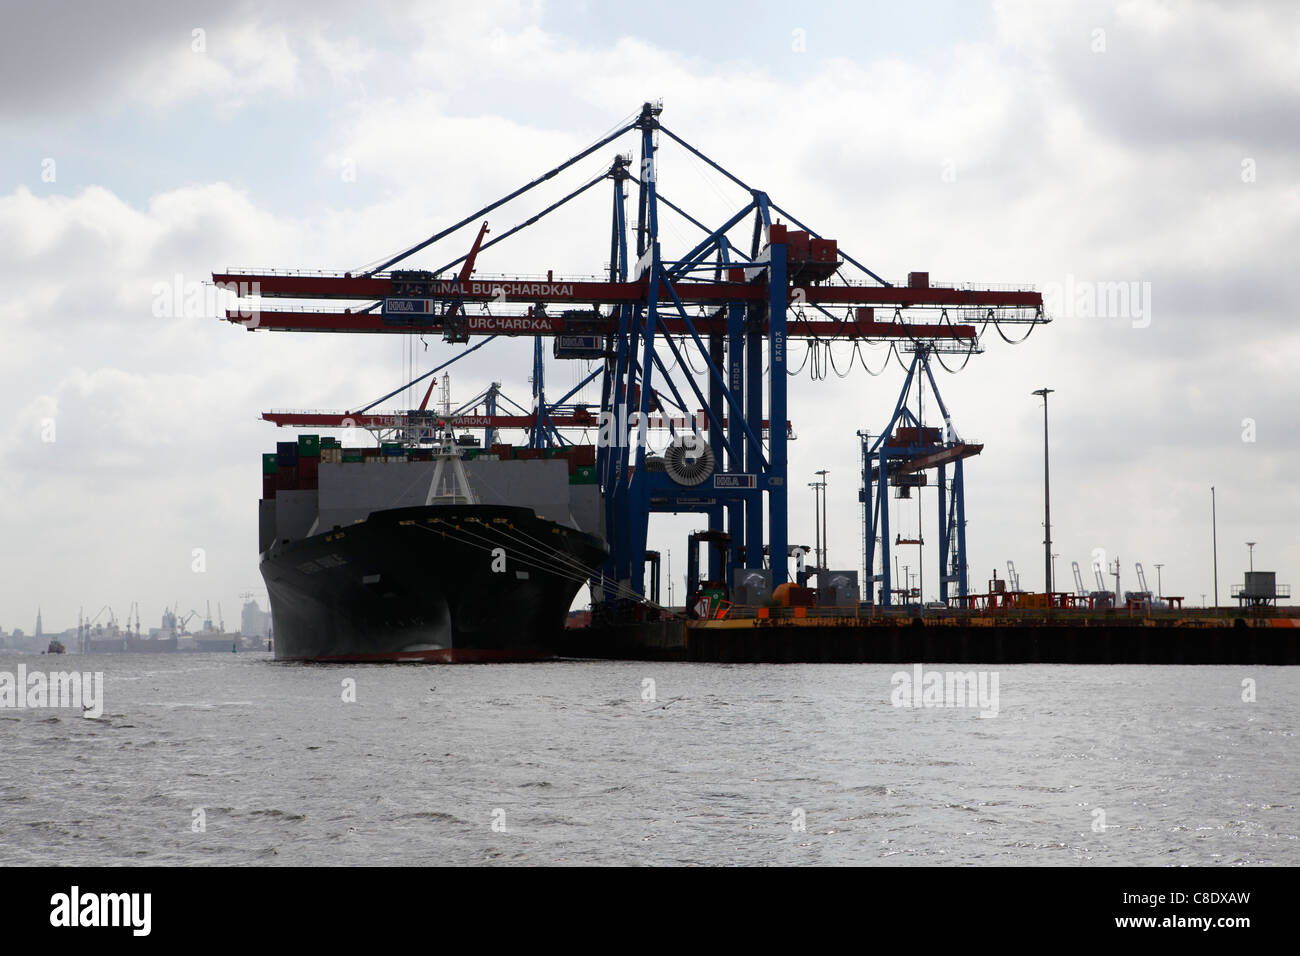 A container ship is unloaded at the Burchardkai Container Terminal in Hamburg, Germany. Stock Photo